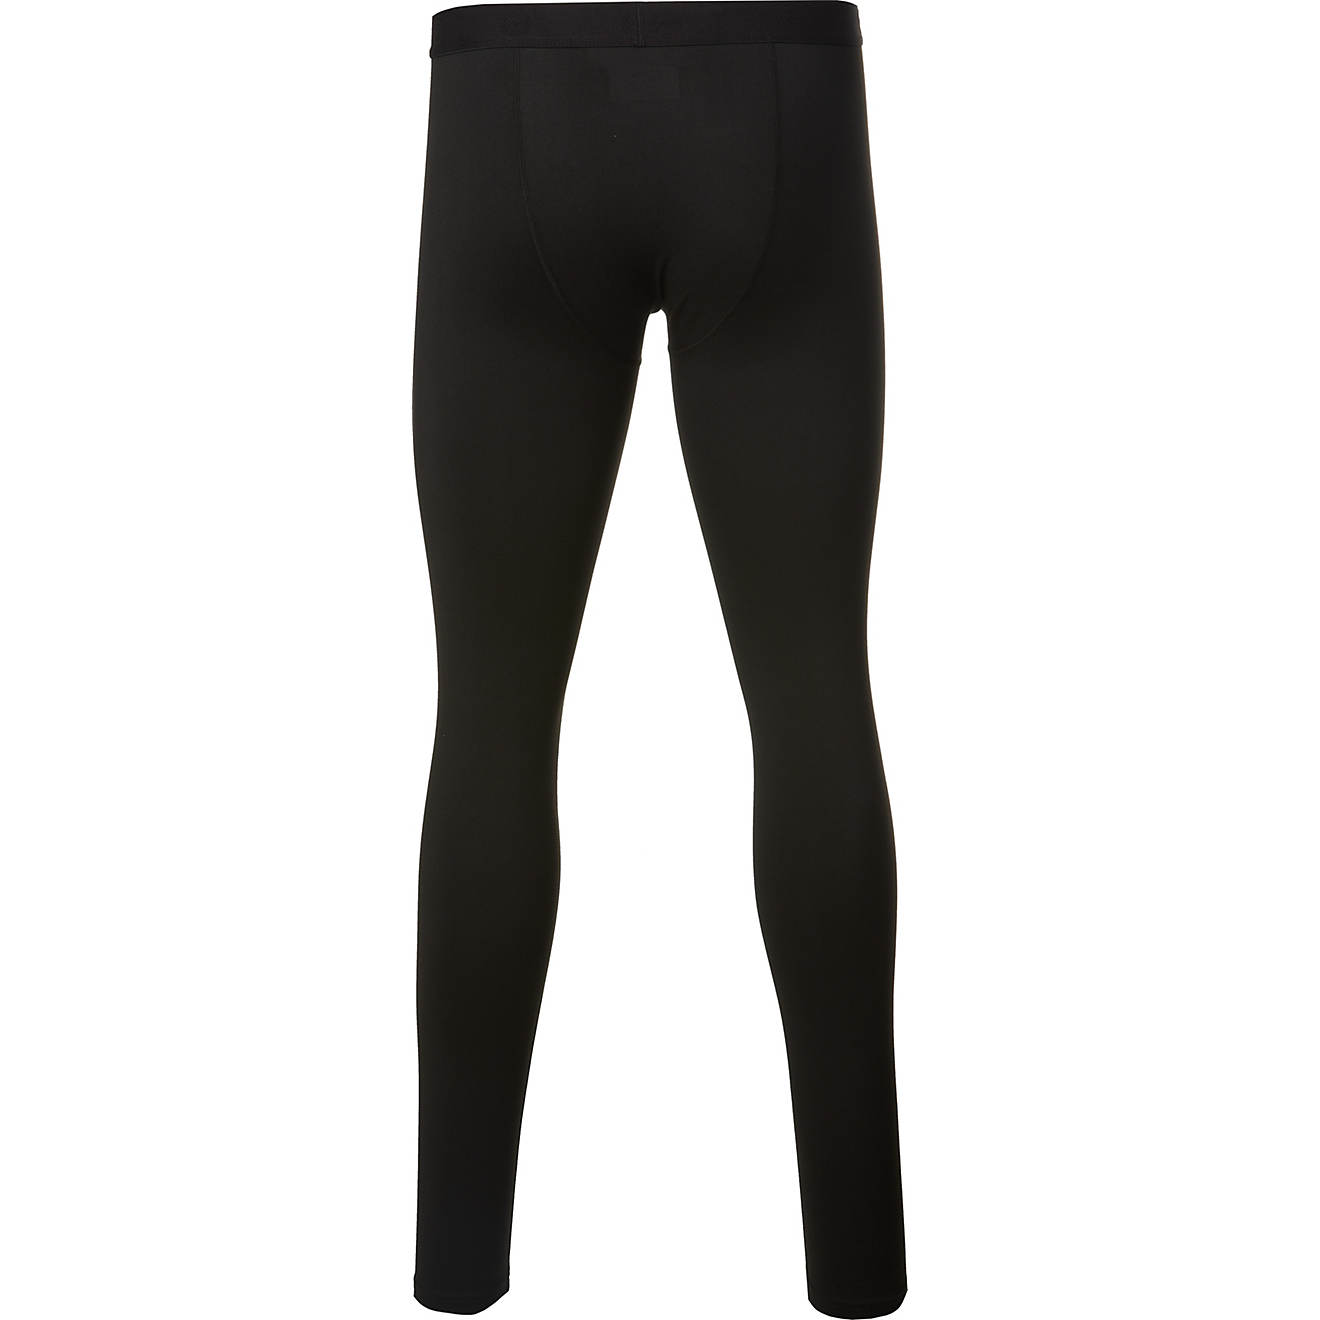 Magellan Outdoors Men's Baselayer 2.0 Thermal Stretch Pants | Academy